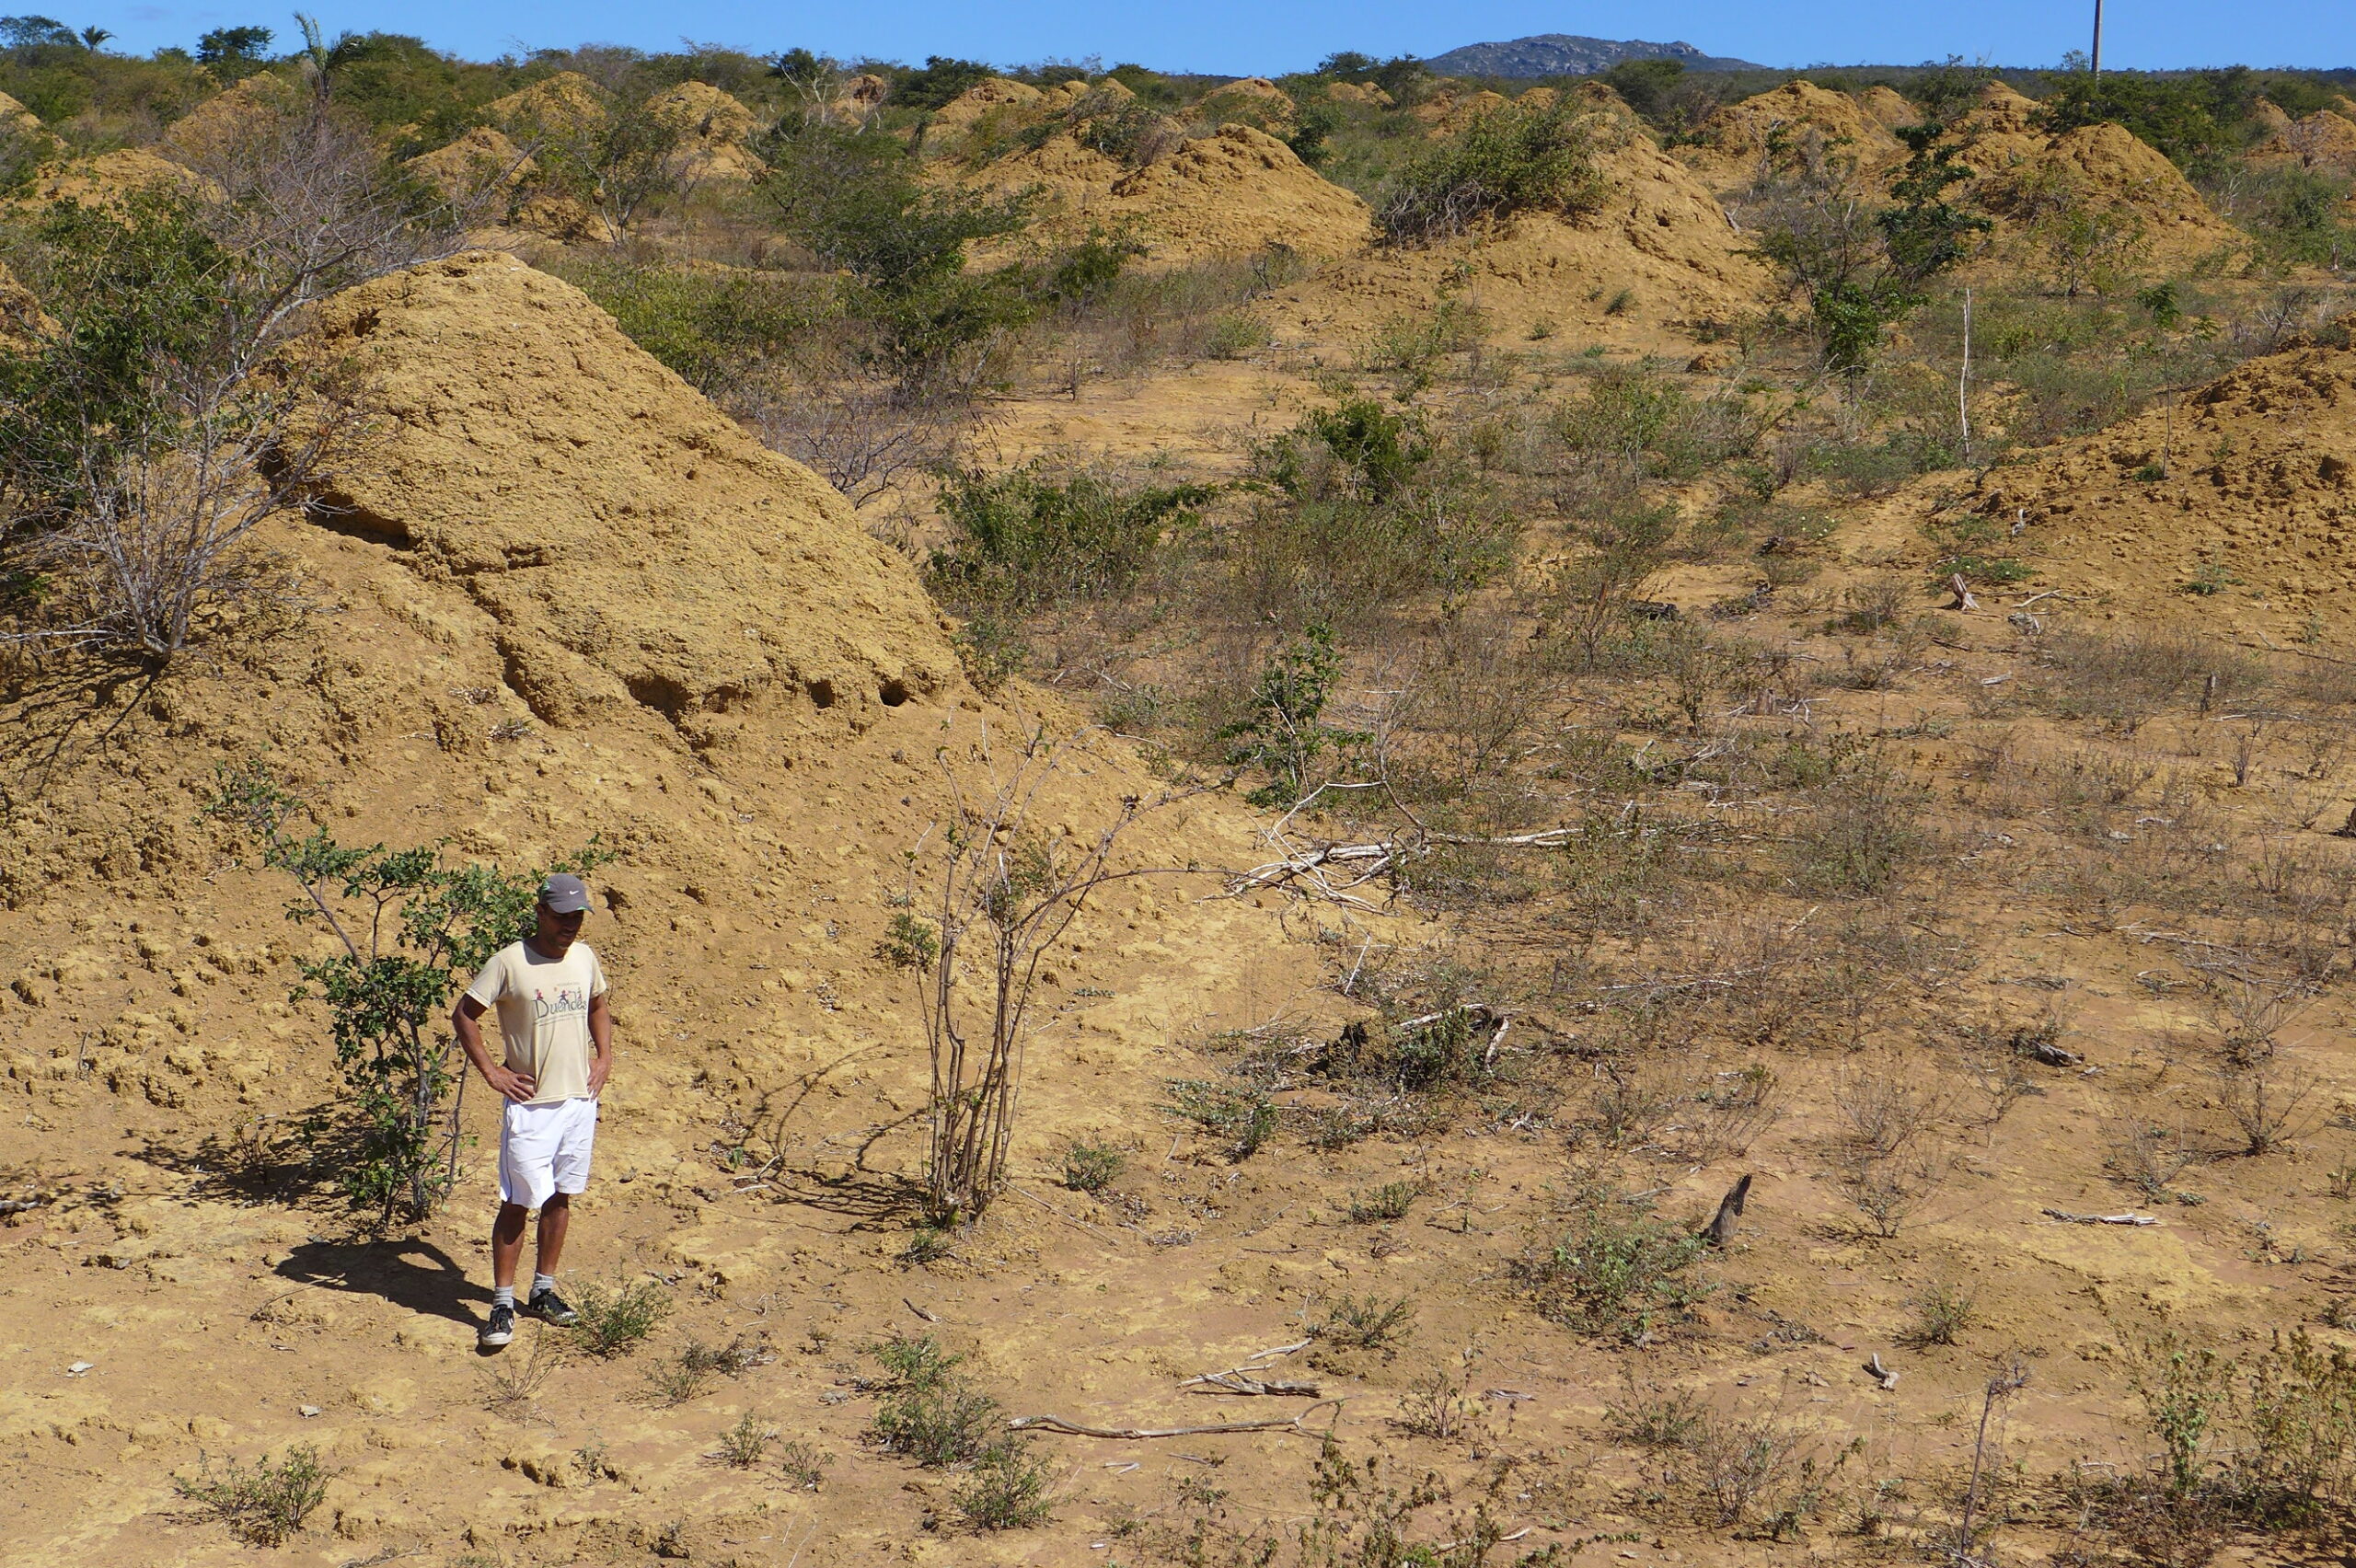 A man stands in front of a large termite mound